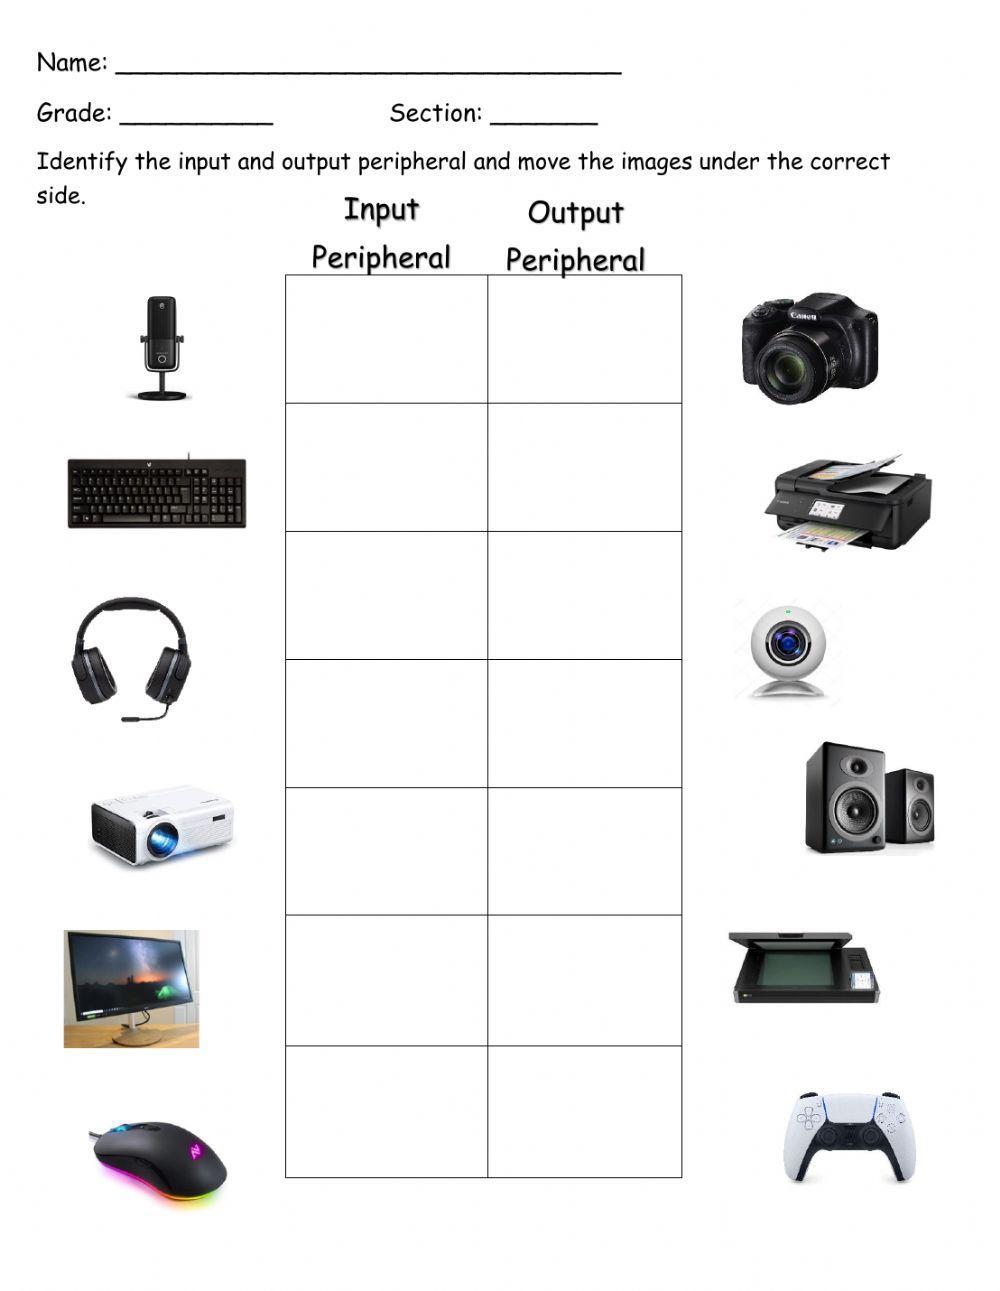 Input and Output Peripherals